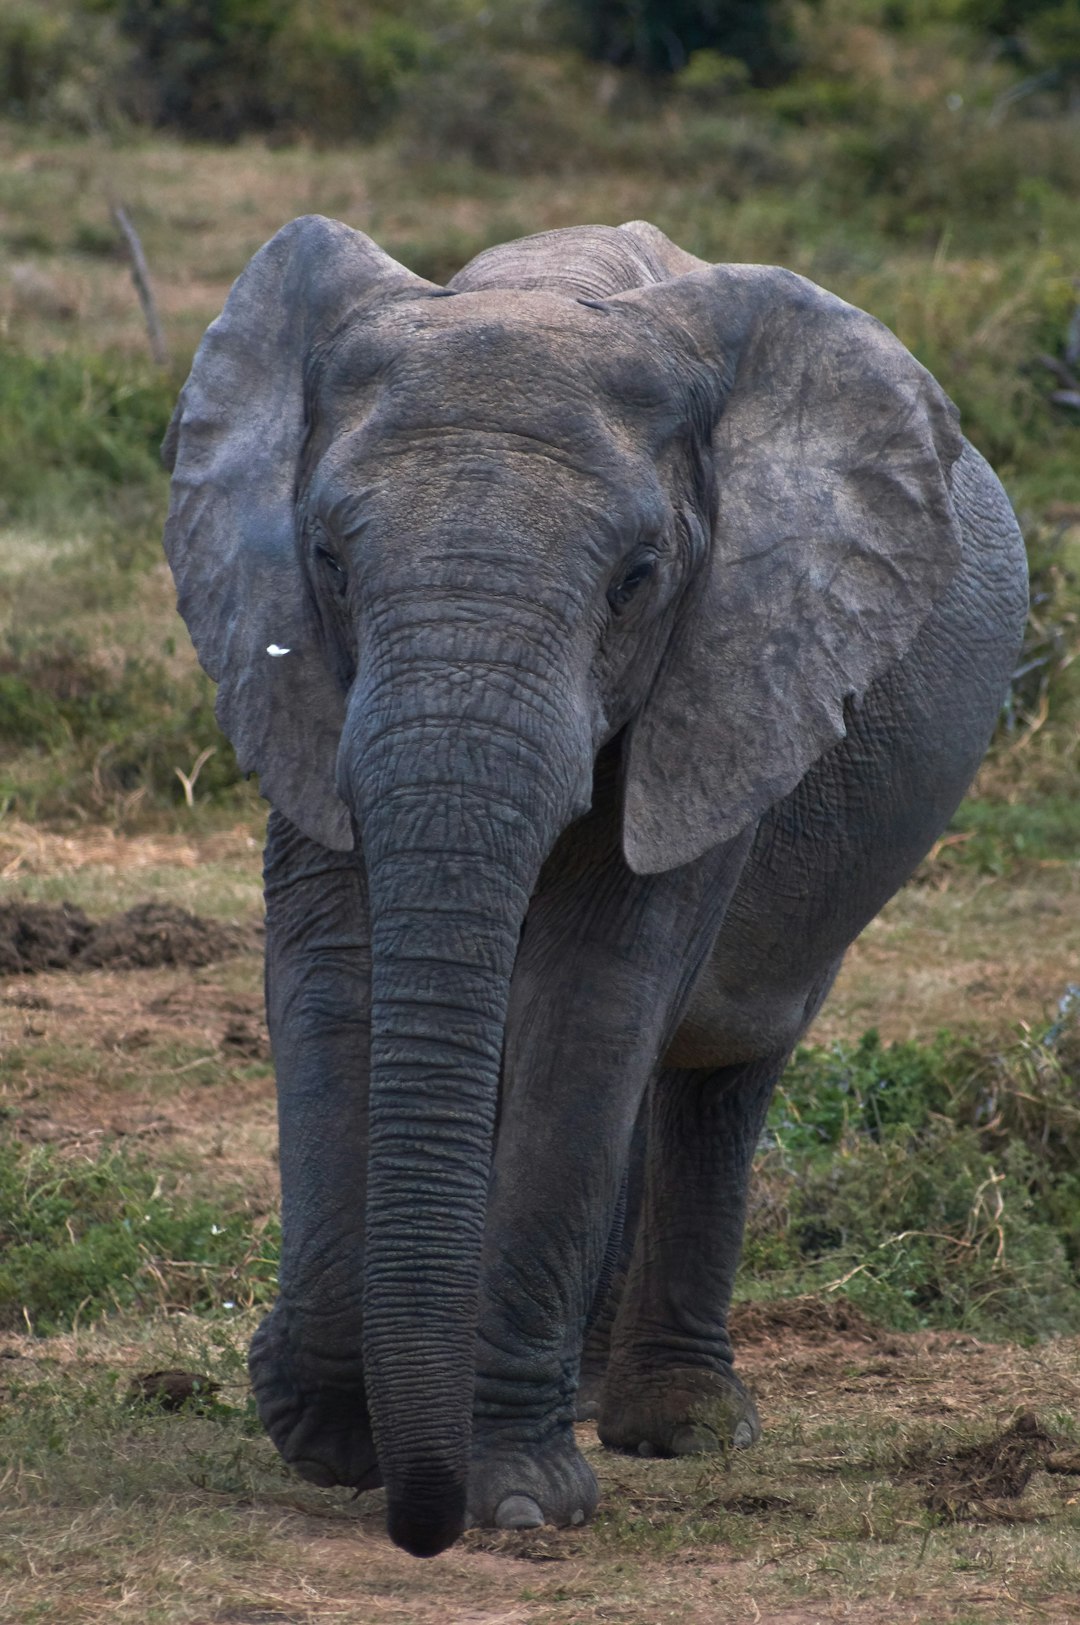 gray elephant on green grass field during daytime